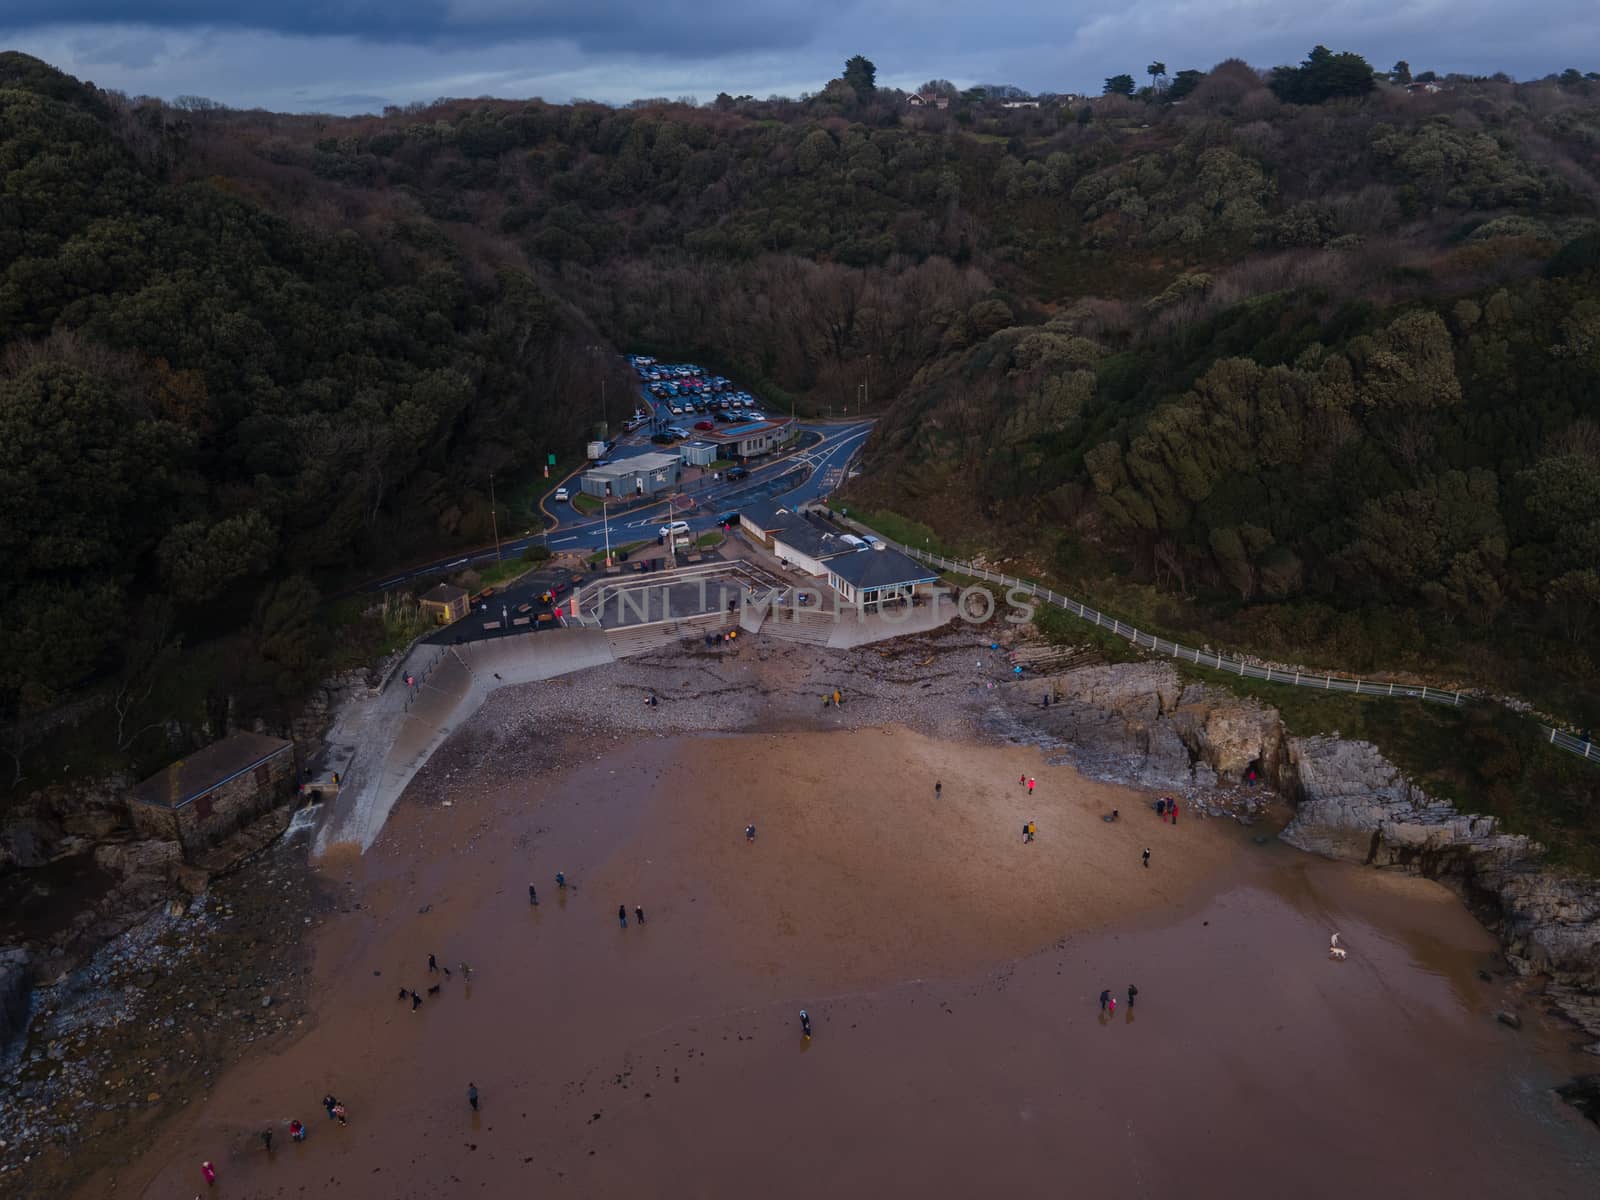 An Ariel View Of Caswell Bay Beach, Gower, Wales, UK At Night In Winter. A popular coastal destination in the cold months. by WCLUK